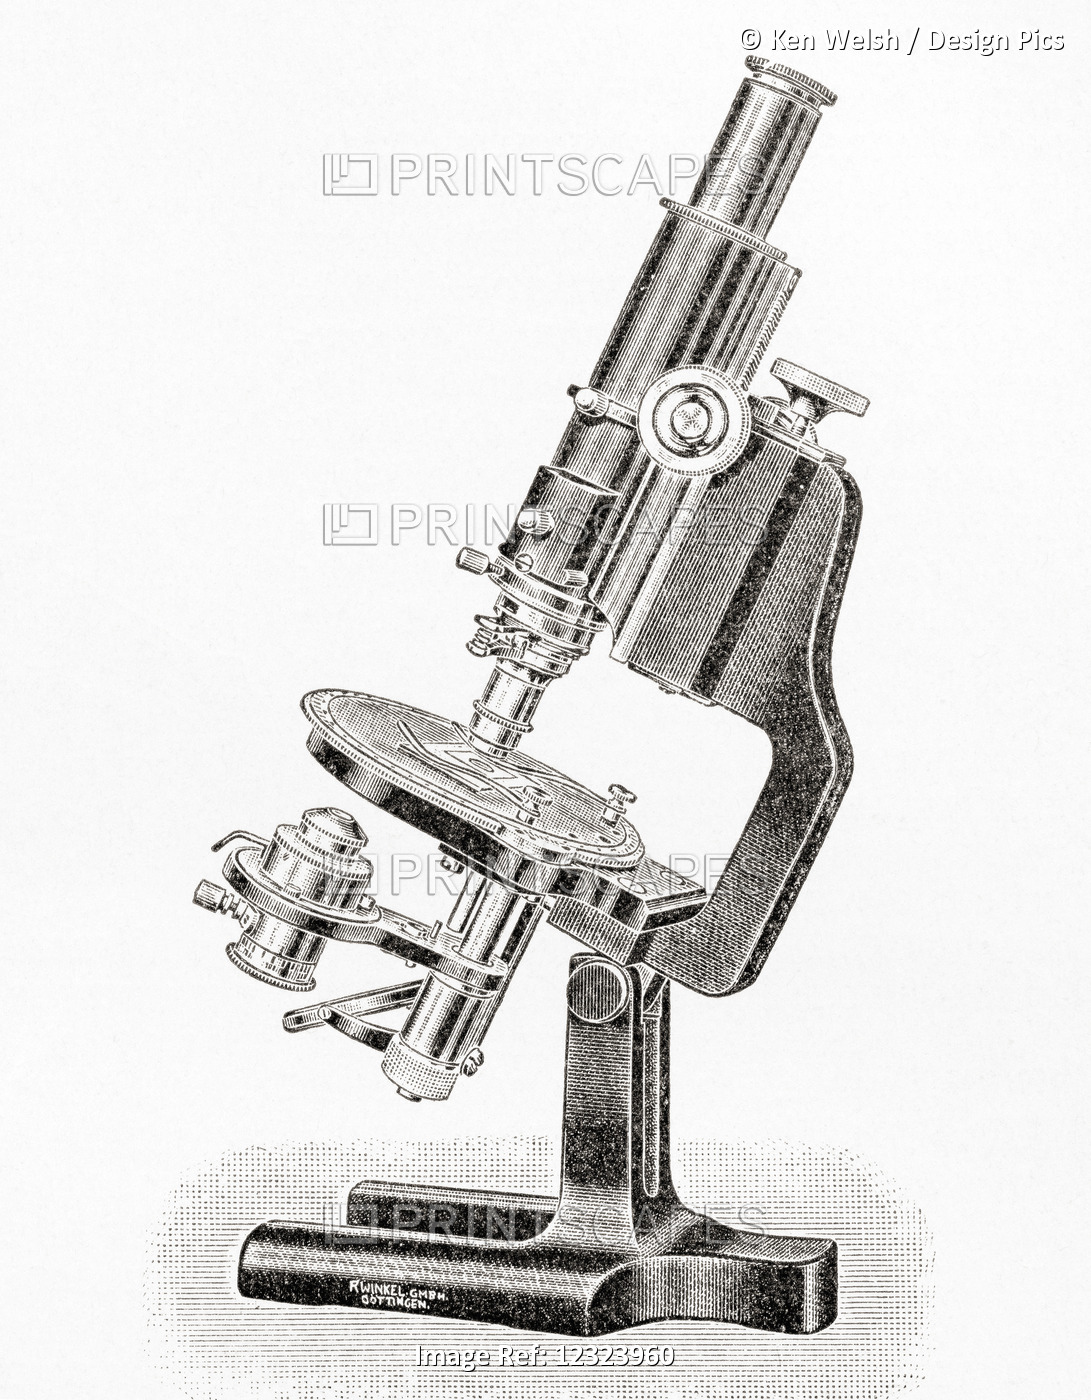 Polarized Light  Microscope.  From Meyers Lexicon, Published 1928.